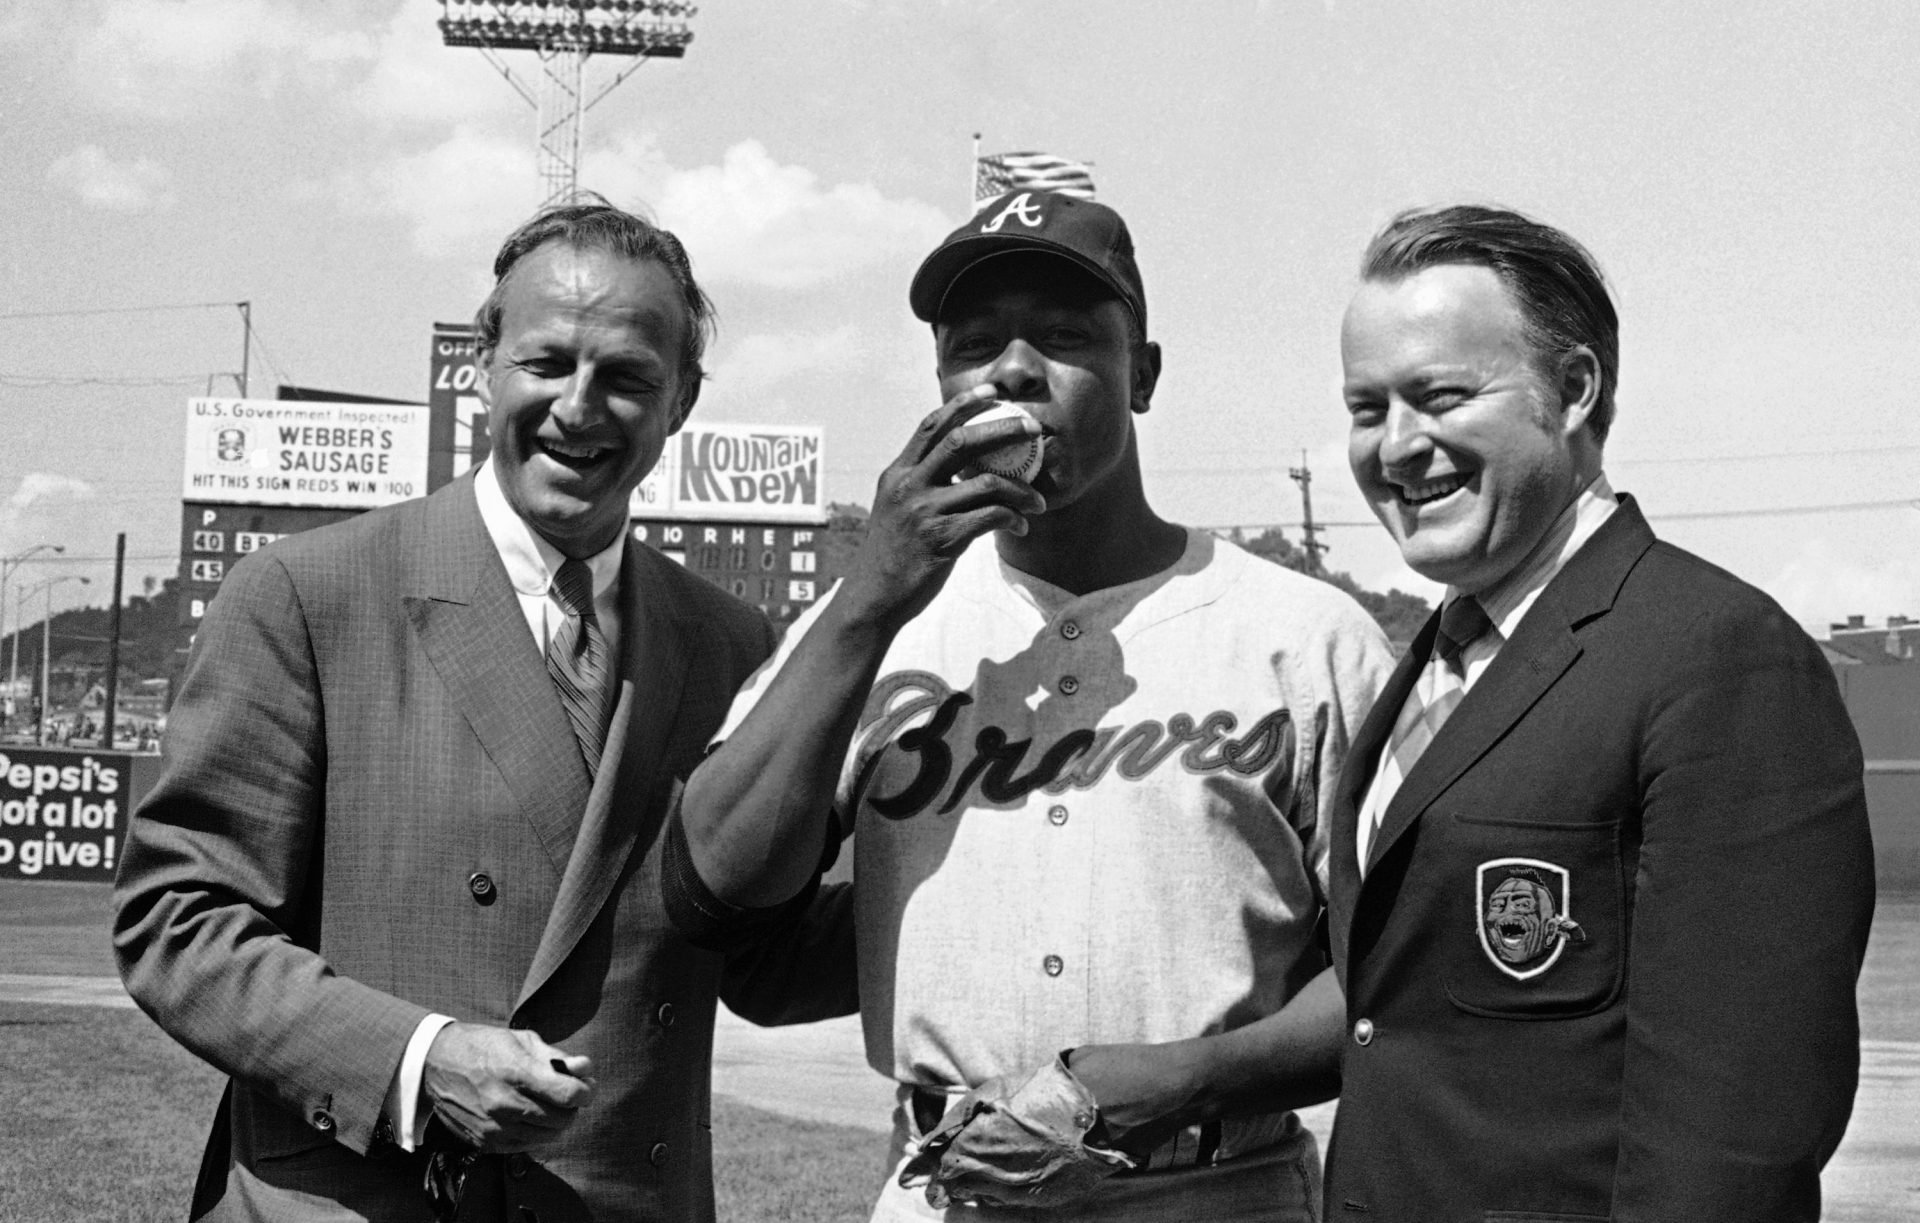 In this May 17, 1970, file photo Atlanta Braves' Hank Aaron, center, poses for photos after getting his 3,000th career hits during a baseball game against the Cincinnati Reds in Cincinnati. At left is Hall of Famer Stan Musial who was the last man to accomplish the feat, hitting his 3,000th in 1958. At right is Bill Bartholomay, owner of the Braves. Hank Aaron, who endured racist threats with stoic dignity during his pursuit of Babe Ruth but went on to break the career home run record in the pre-steroids era, died early Friday, Jan. 22, 2021. He was 86. The Atlanta Braves said Aaron died peacefully in his sleep. No cause of death was given.